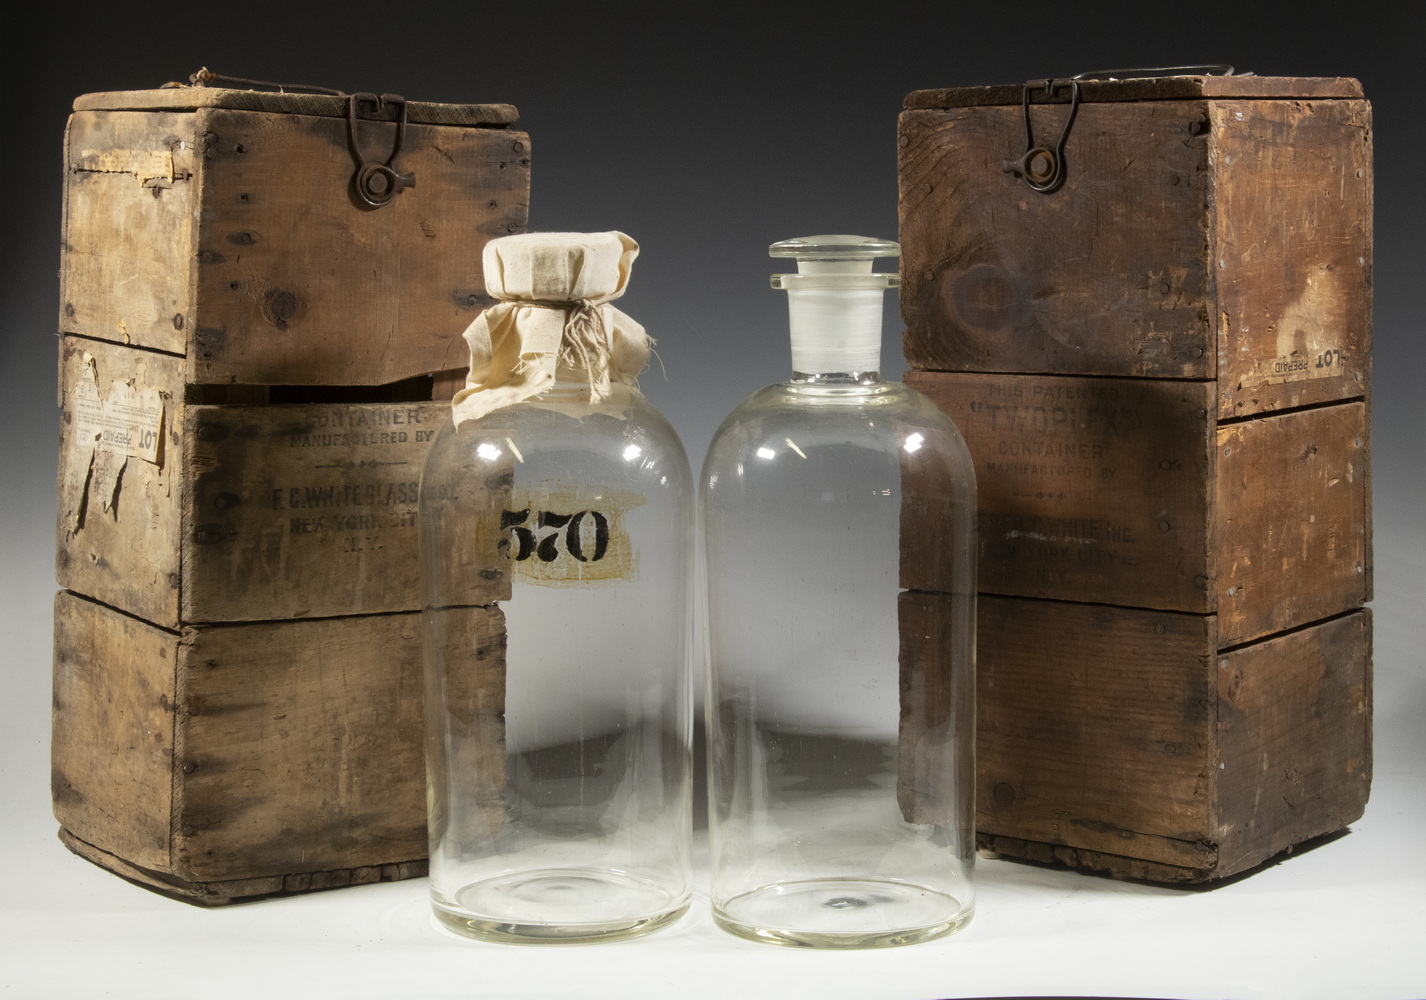 PR OF EARLY 20TH C CHEMICAL BOTTLES 3028b9